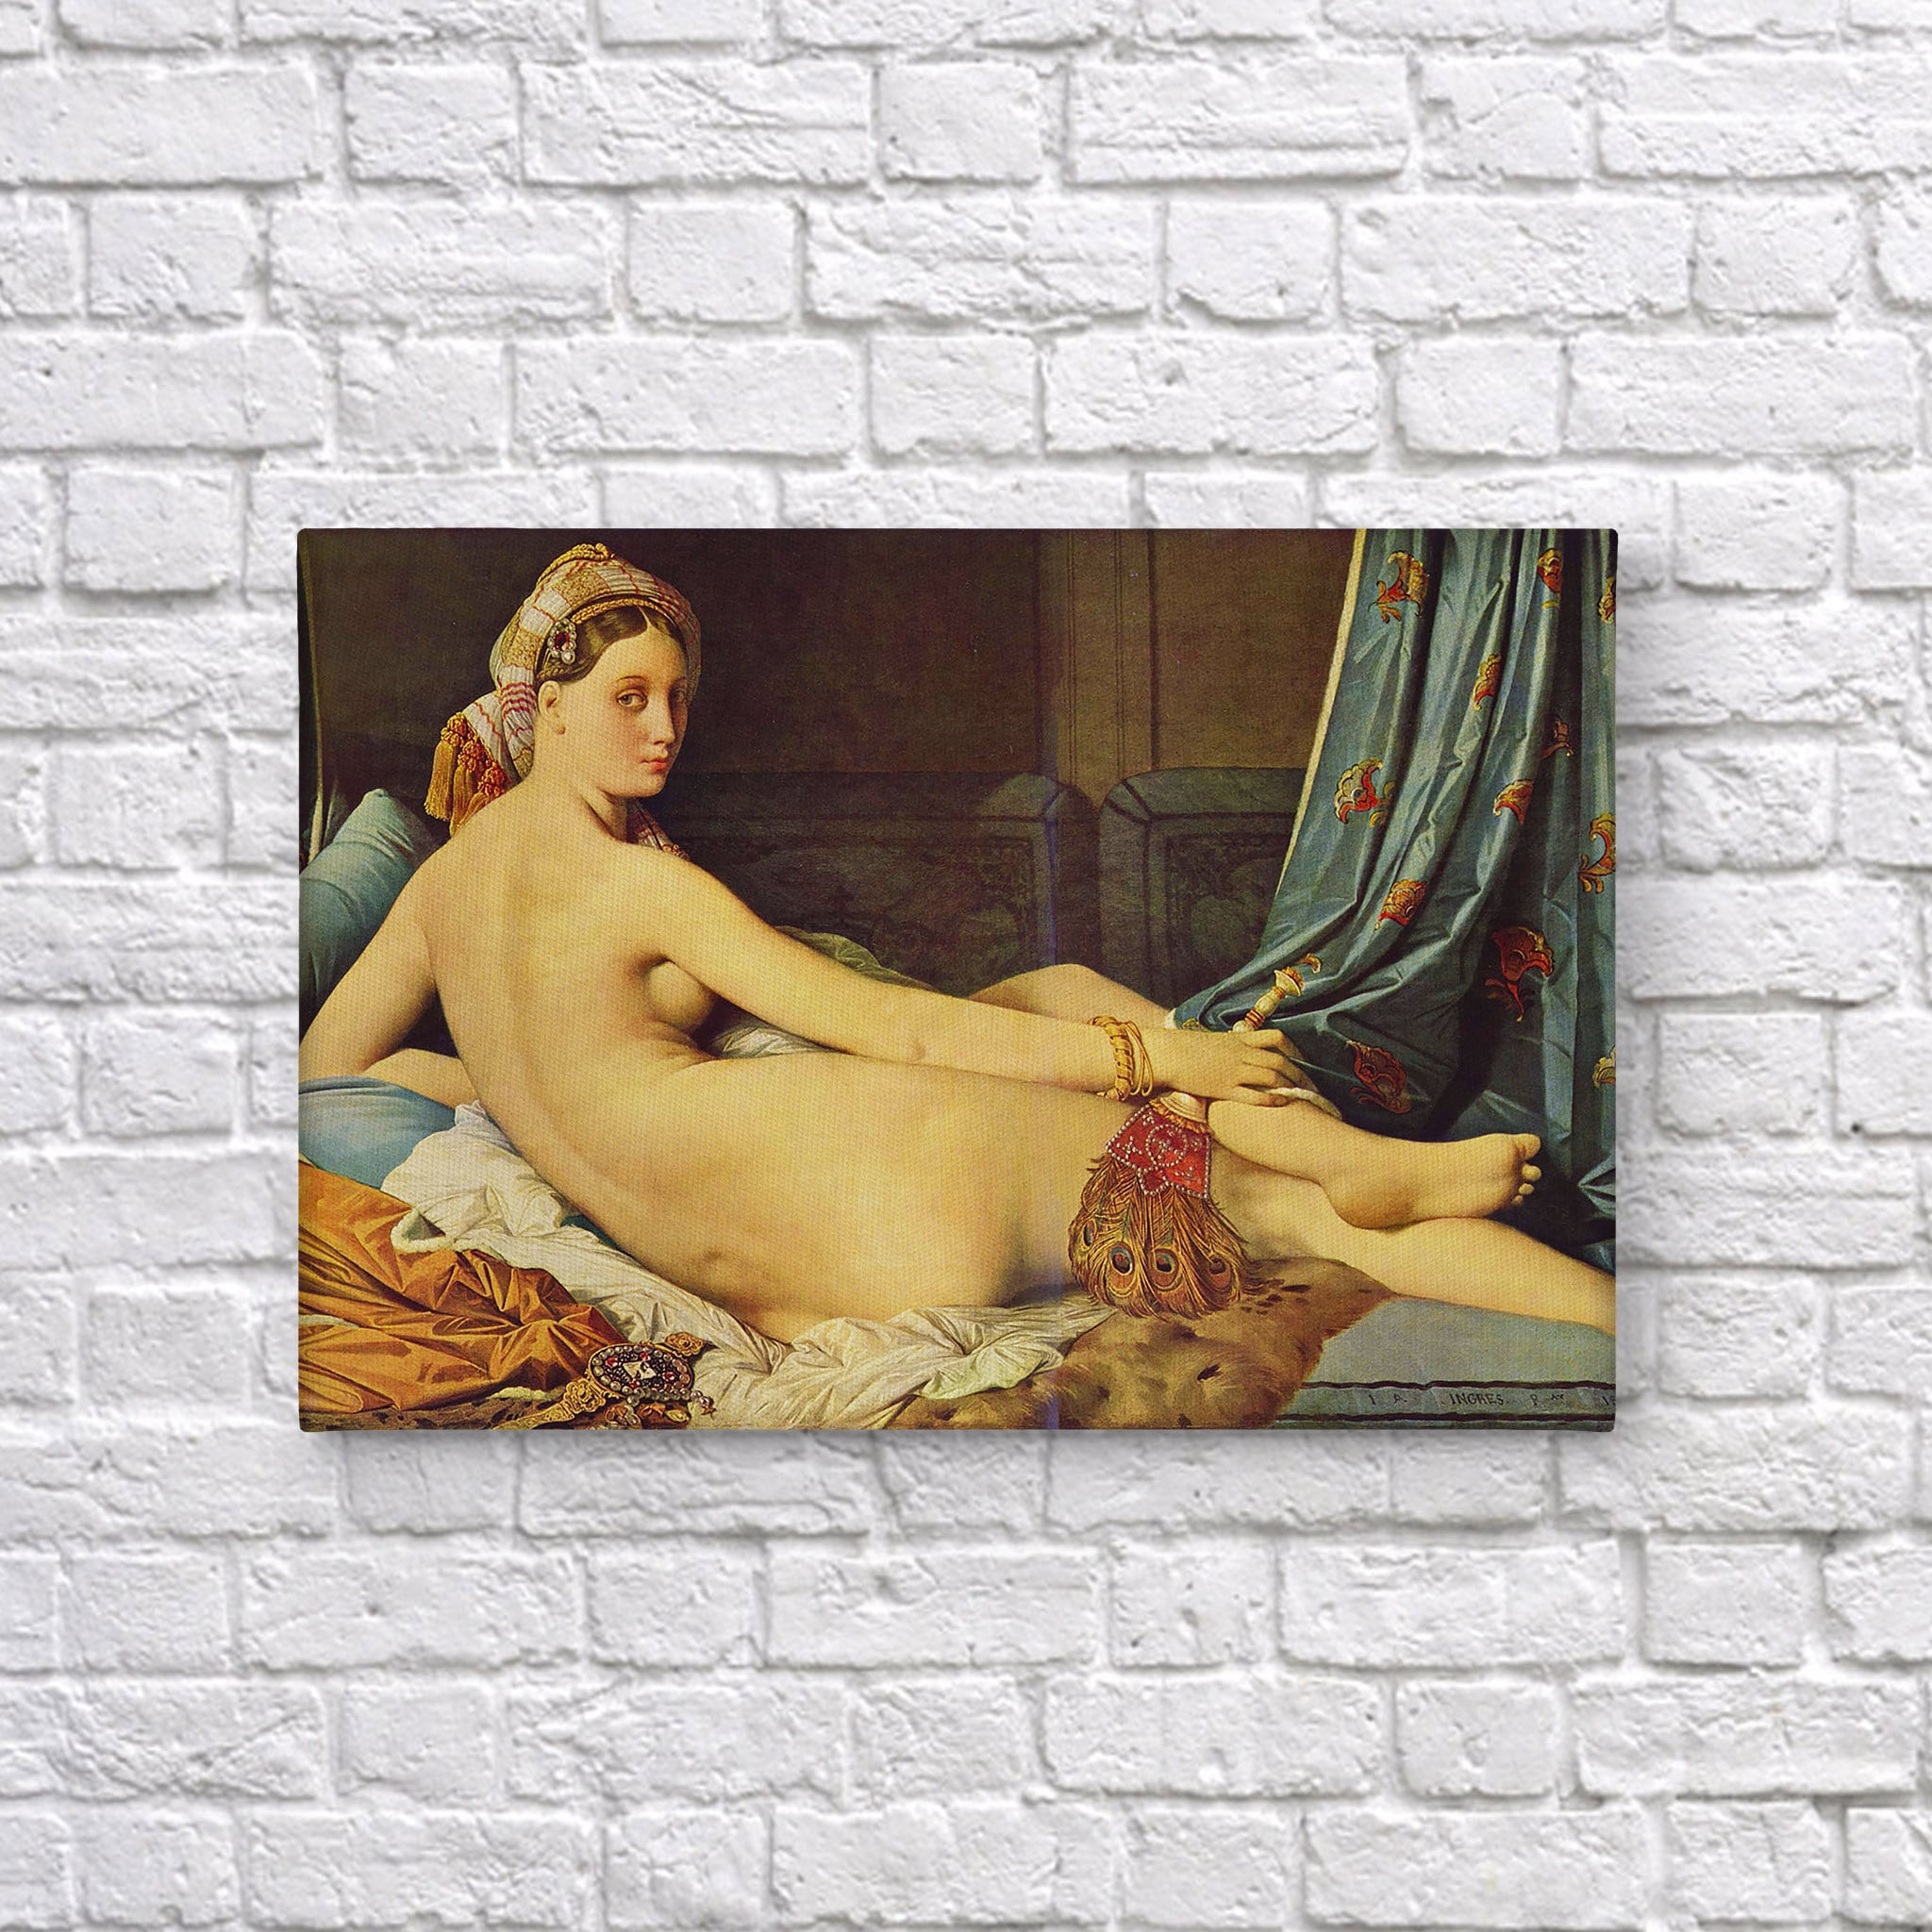 Nude Art Sexy Woman Middle East Old Vintage Painting Naked